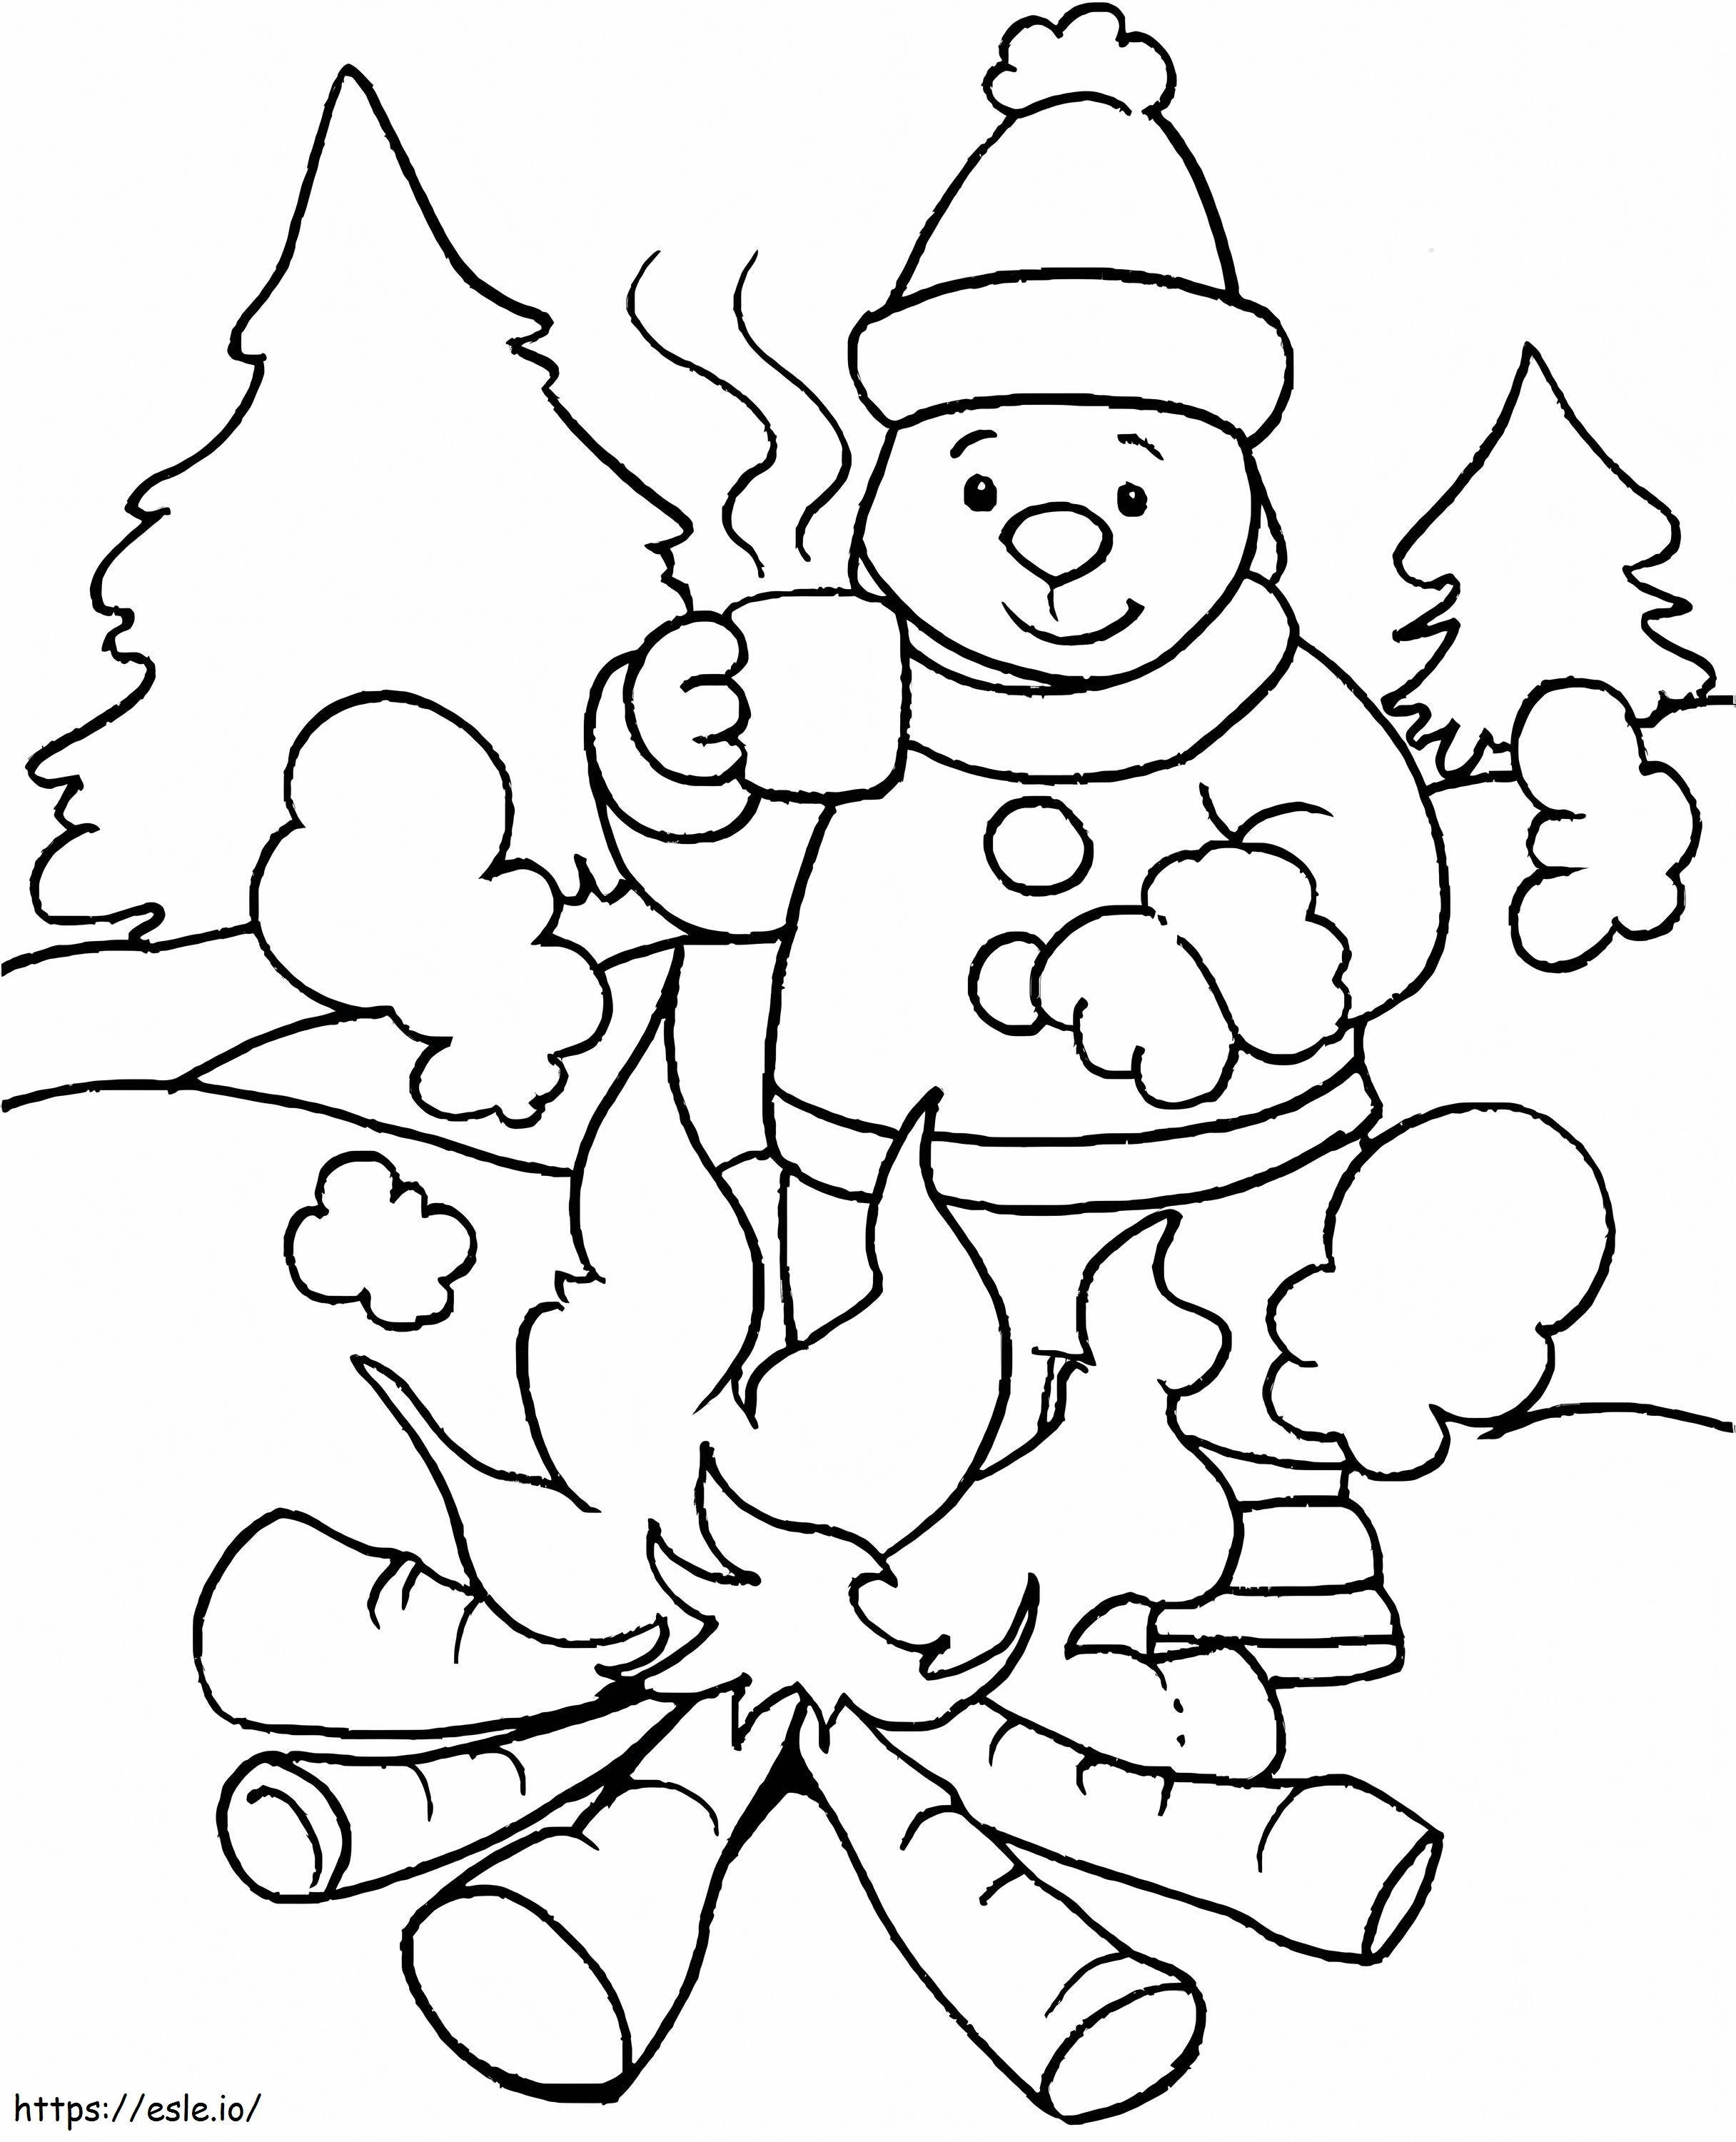 Man And Firefighter Camp In Winter coloring page